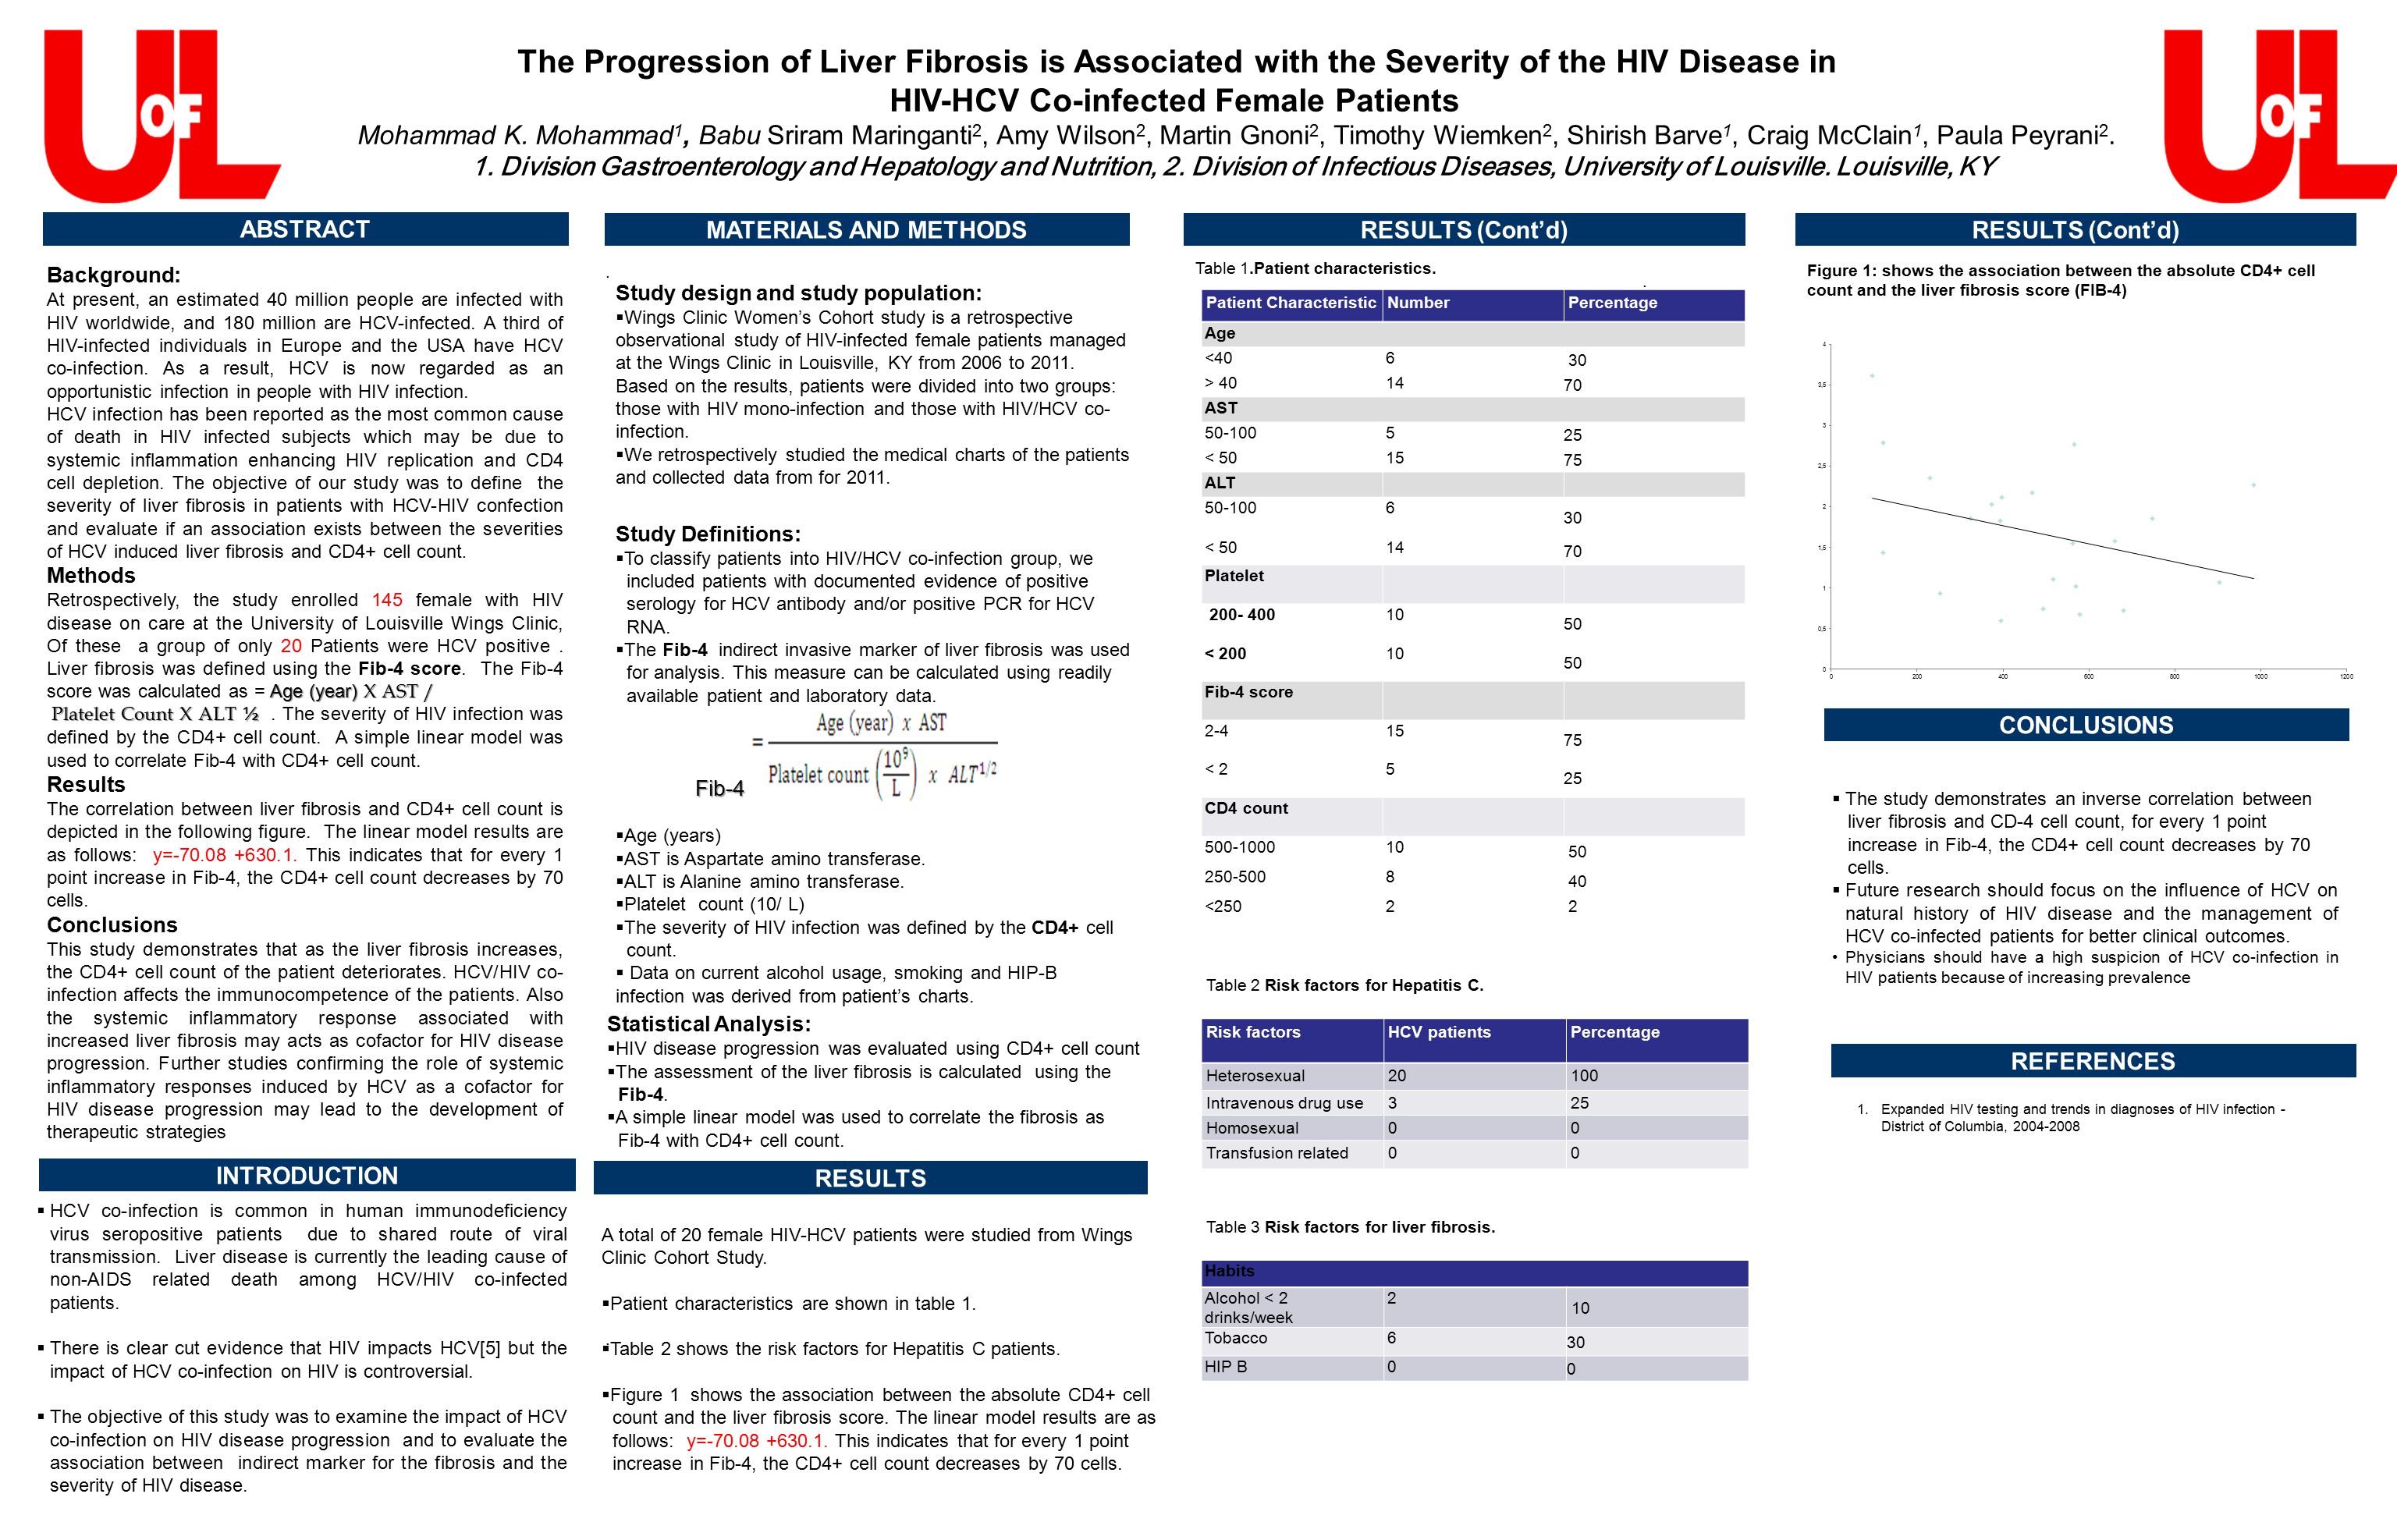 The Progression of Liver Fibrosis is Associated with the Severity of the HIV Disease in HIV-HCV Co-infected Female Patients Mohammad K.